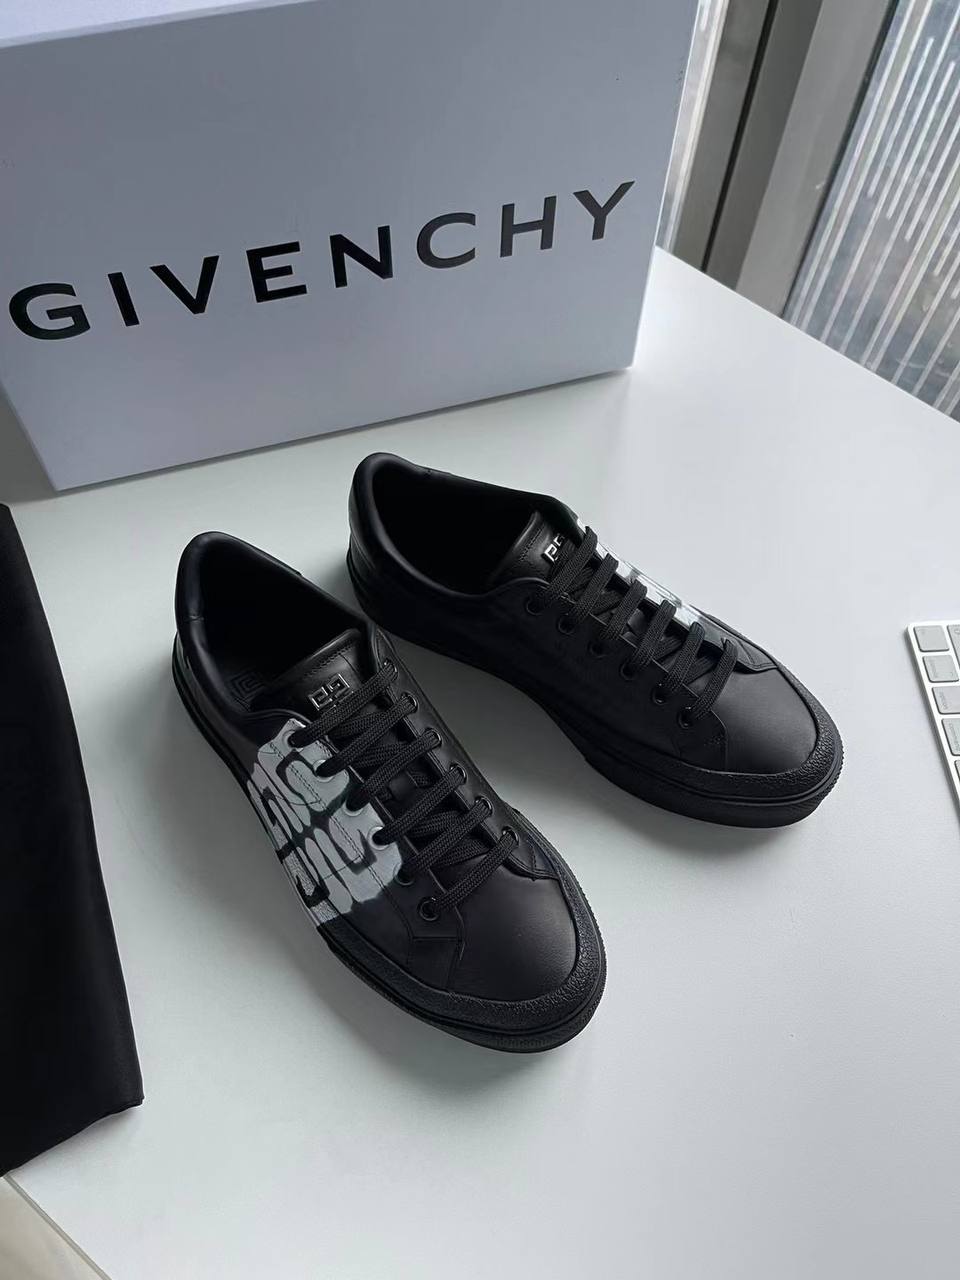 Givenchy Josh Smith X GIV~HY joint name sport shoe – No#1